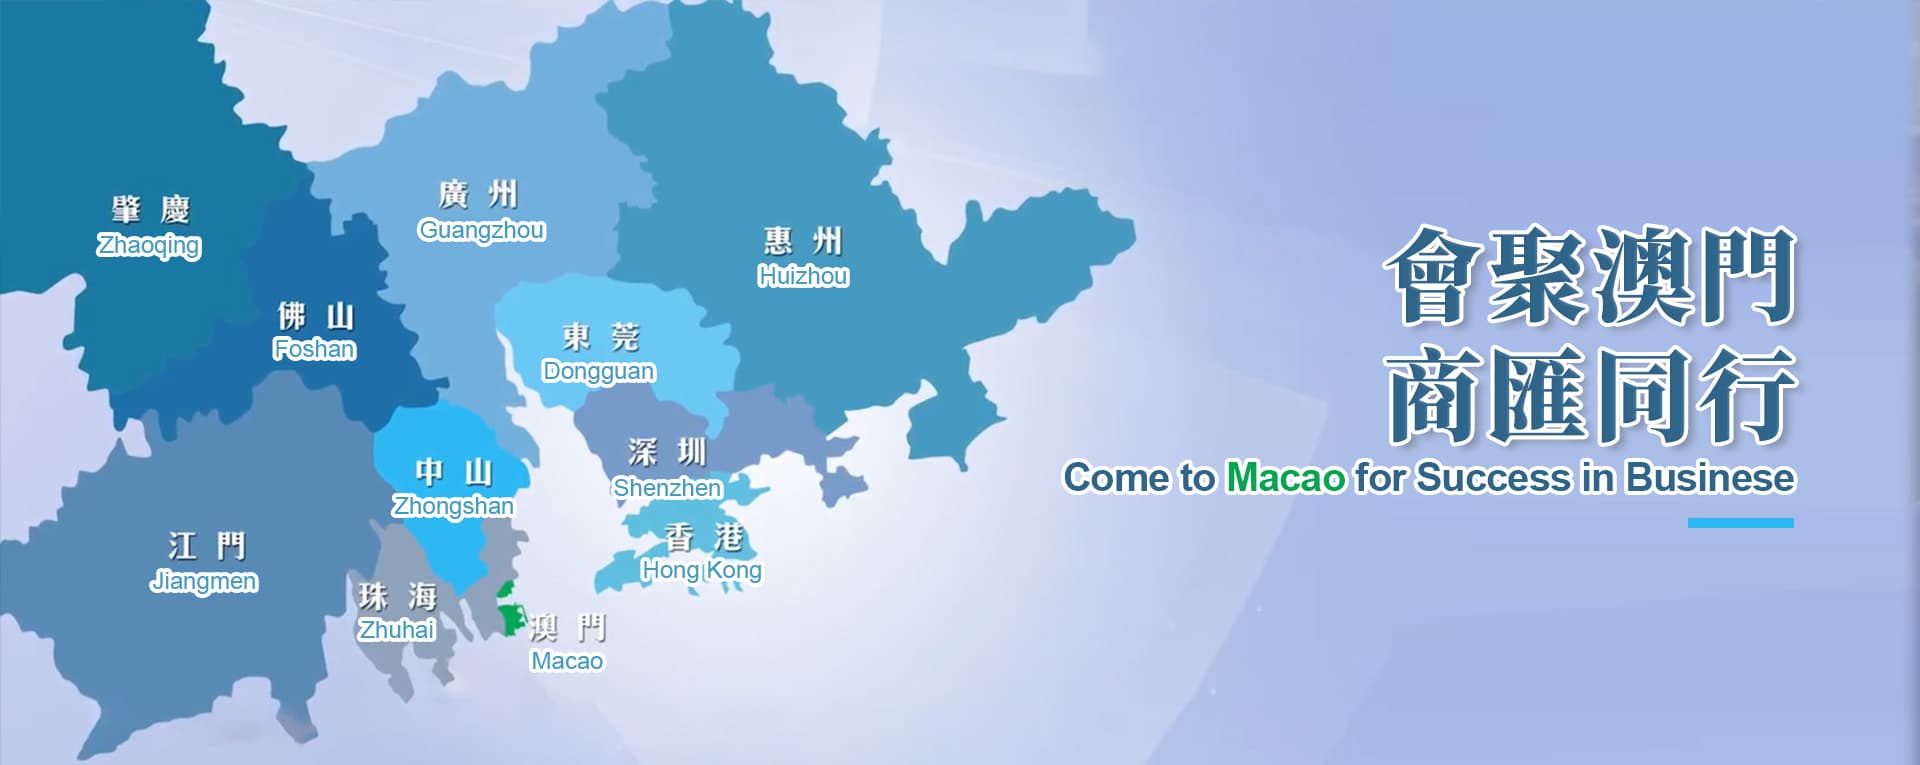 Come to Macao for Success in Business